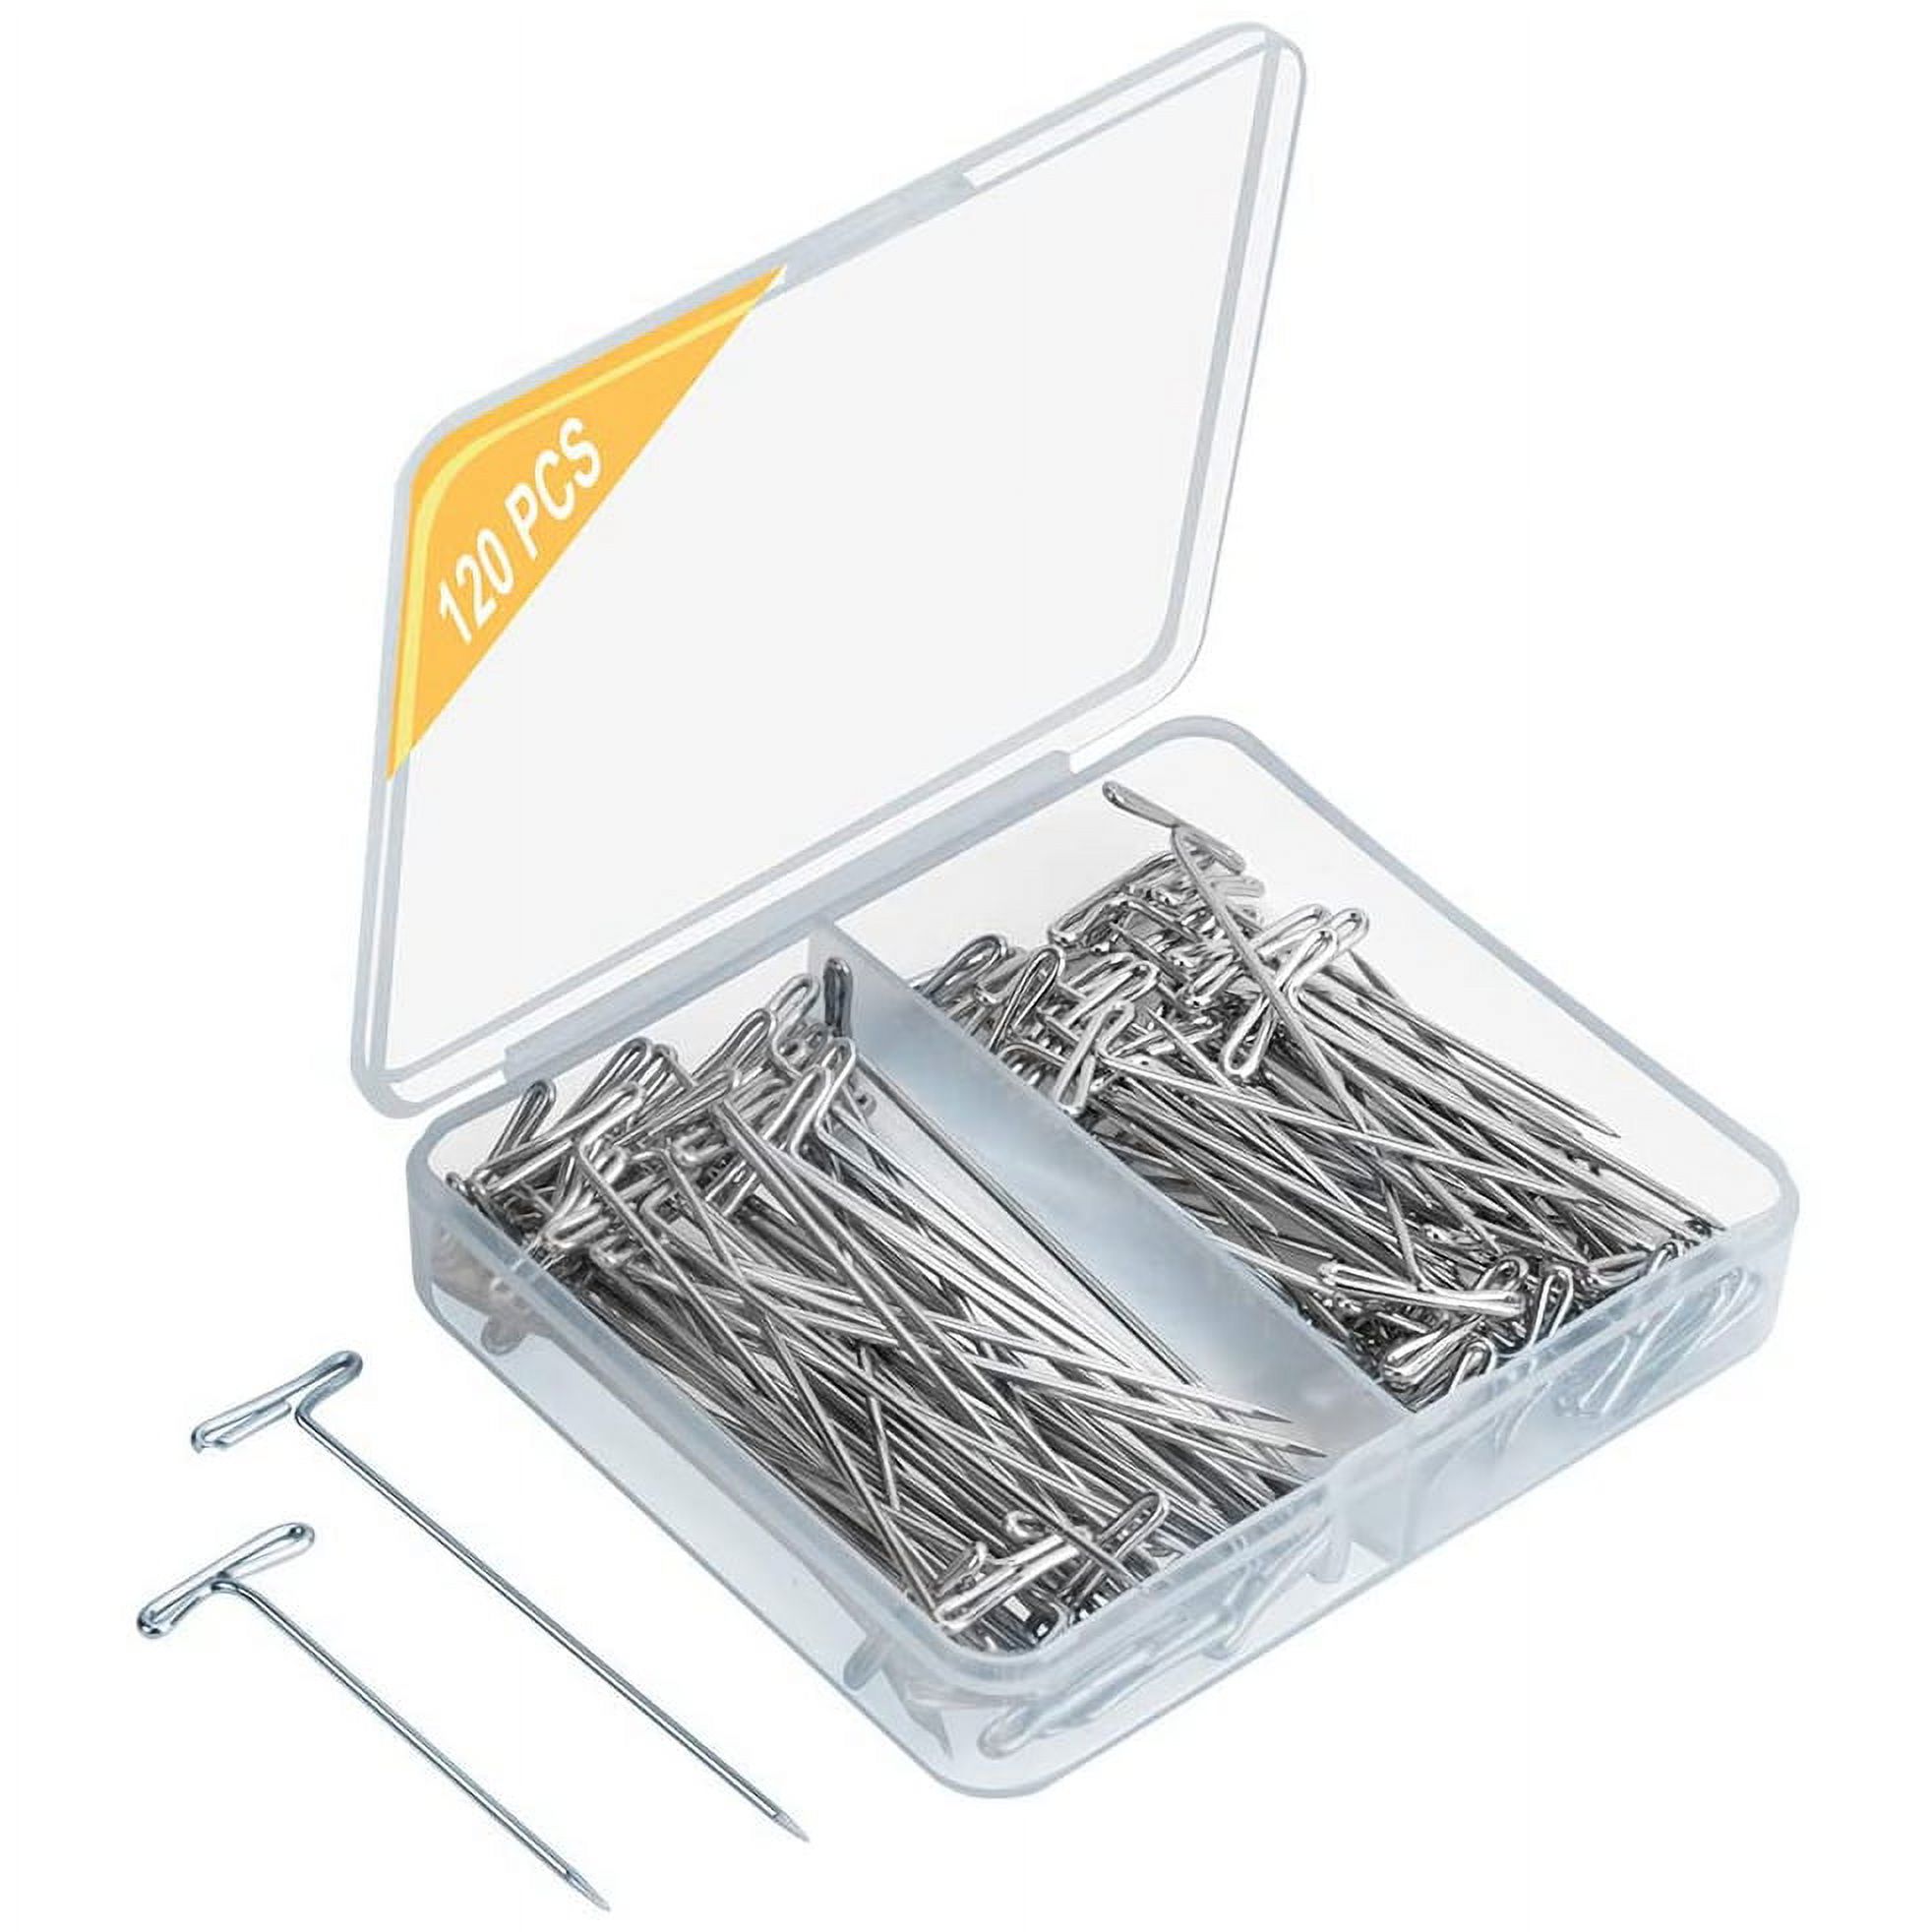 120 PCS T - Pins, Stainless Steel Wig T Pins 2 in (50 PCS) and (70 PCS)  1-1/2 in, Silver T Shaped Pins for Blocking Knitting, Modelling Crafts and  Office with Plastic Box. 